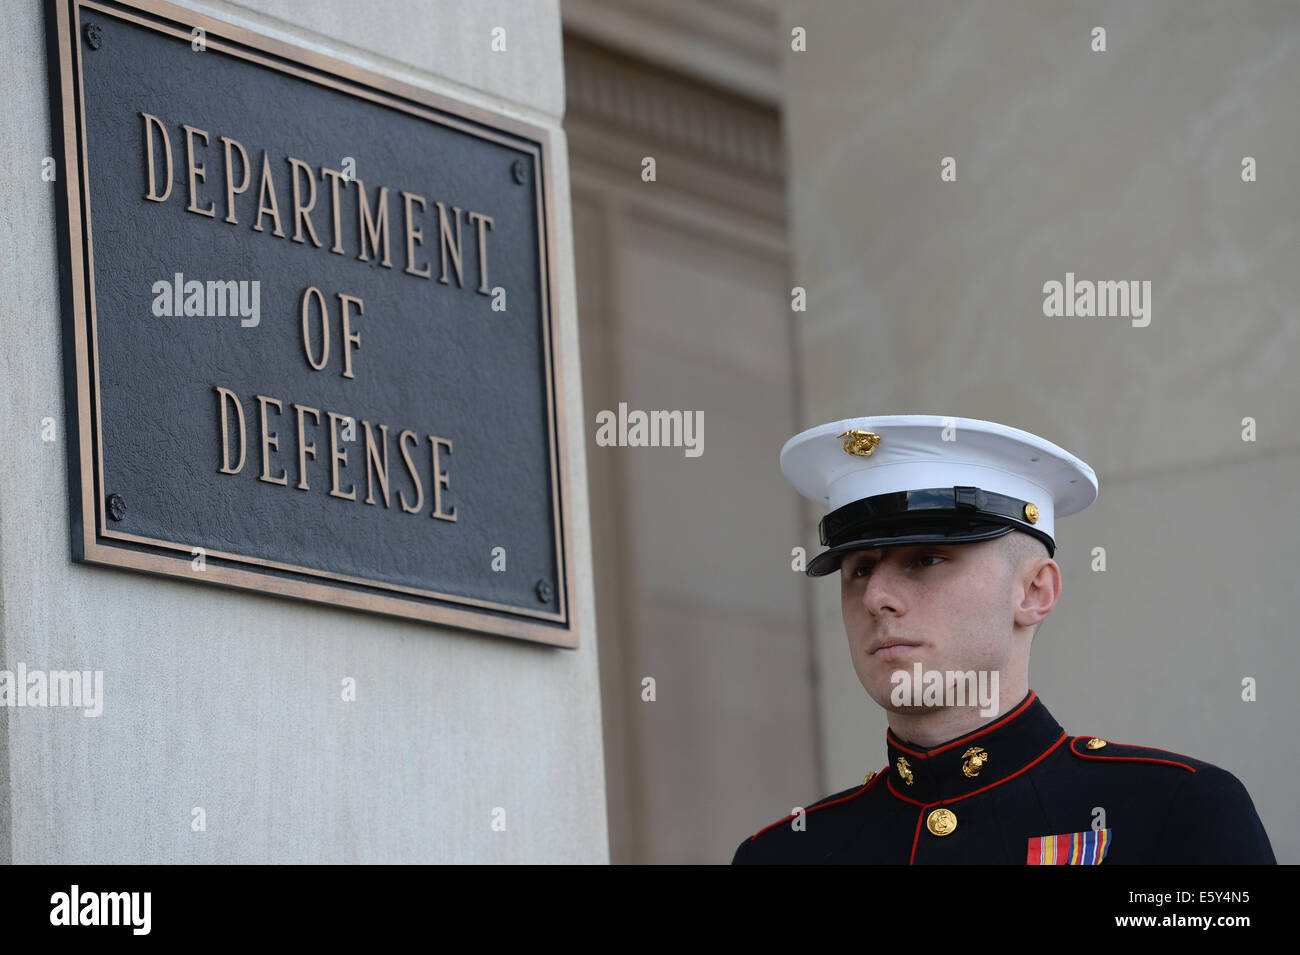 Washington, DC, USA. 13th Jan, 2014. File photo taken on Jan. 13, 2014 shows soldiers of honor guard attending a ceremony at the Pentagon, Washington, DC, capital of the United States. The U.S. military said Friday it has launched targeted airstrikes on the Islamic State of Iraq and the Levant (ISIL) militants in north Iraq by dropping two laser-guided bombs on their mobile artillery. © Yin Bogu/Xinhua/Alamy Live News Stock Photo